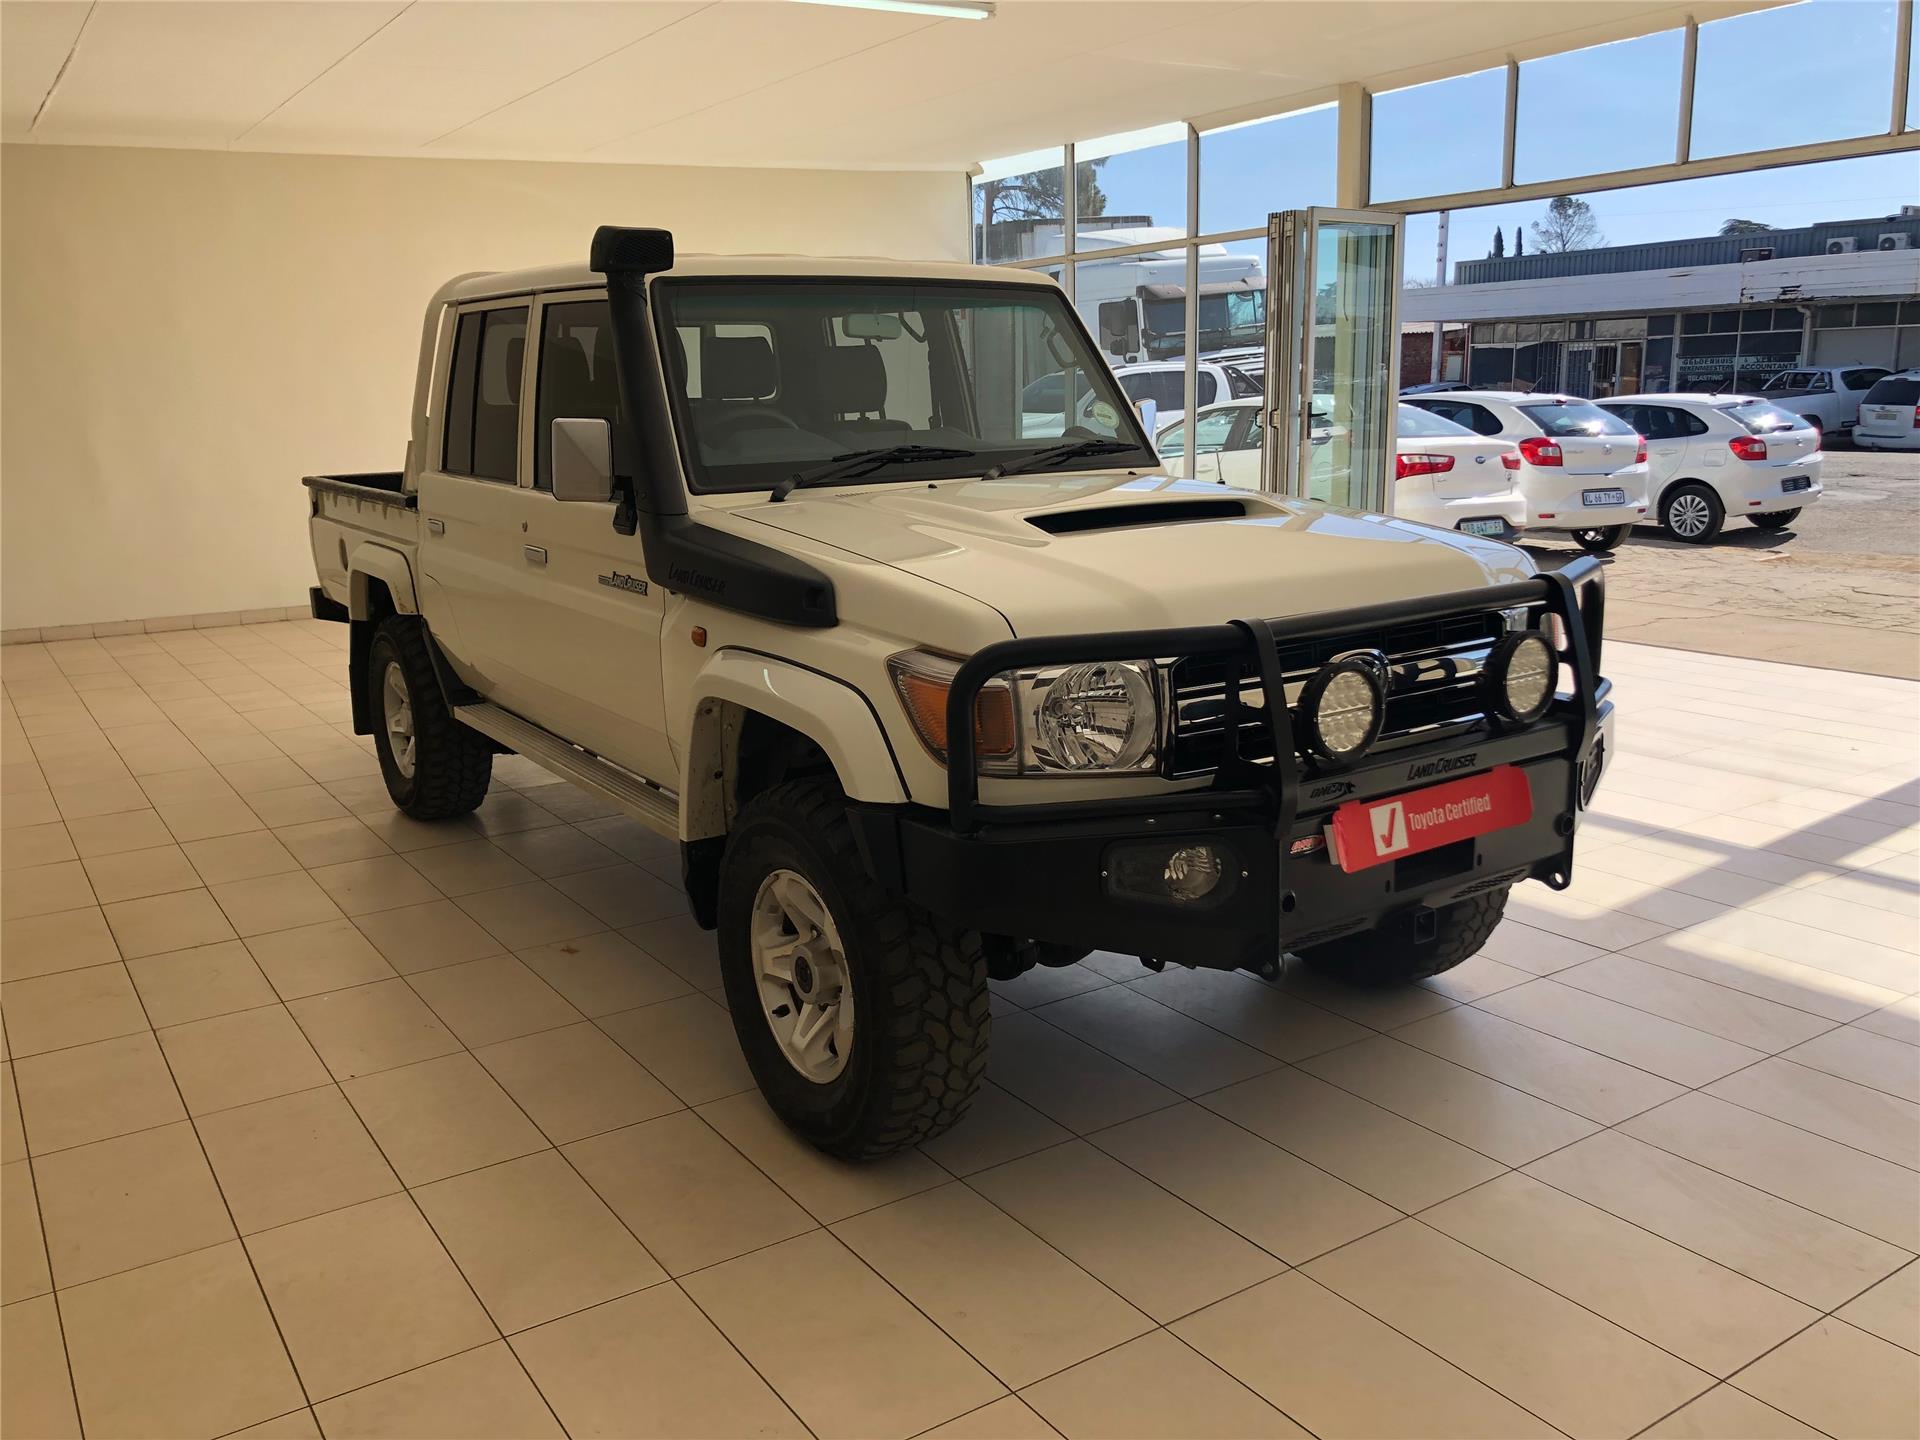 2021 Toyota Land Cruiser 79  for sale - 1065834/1